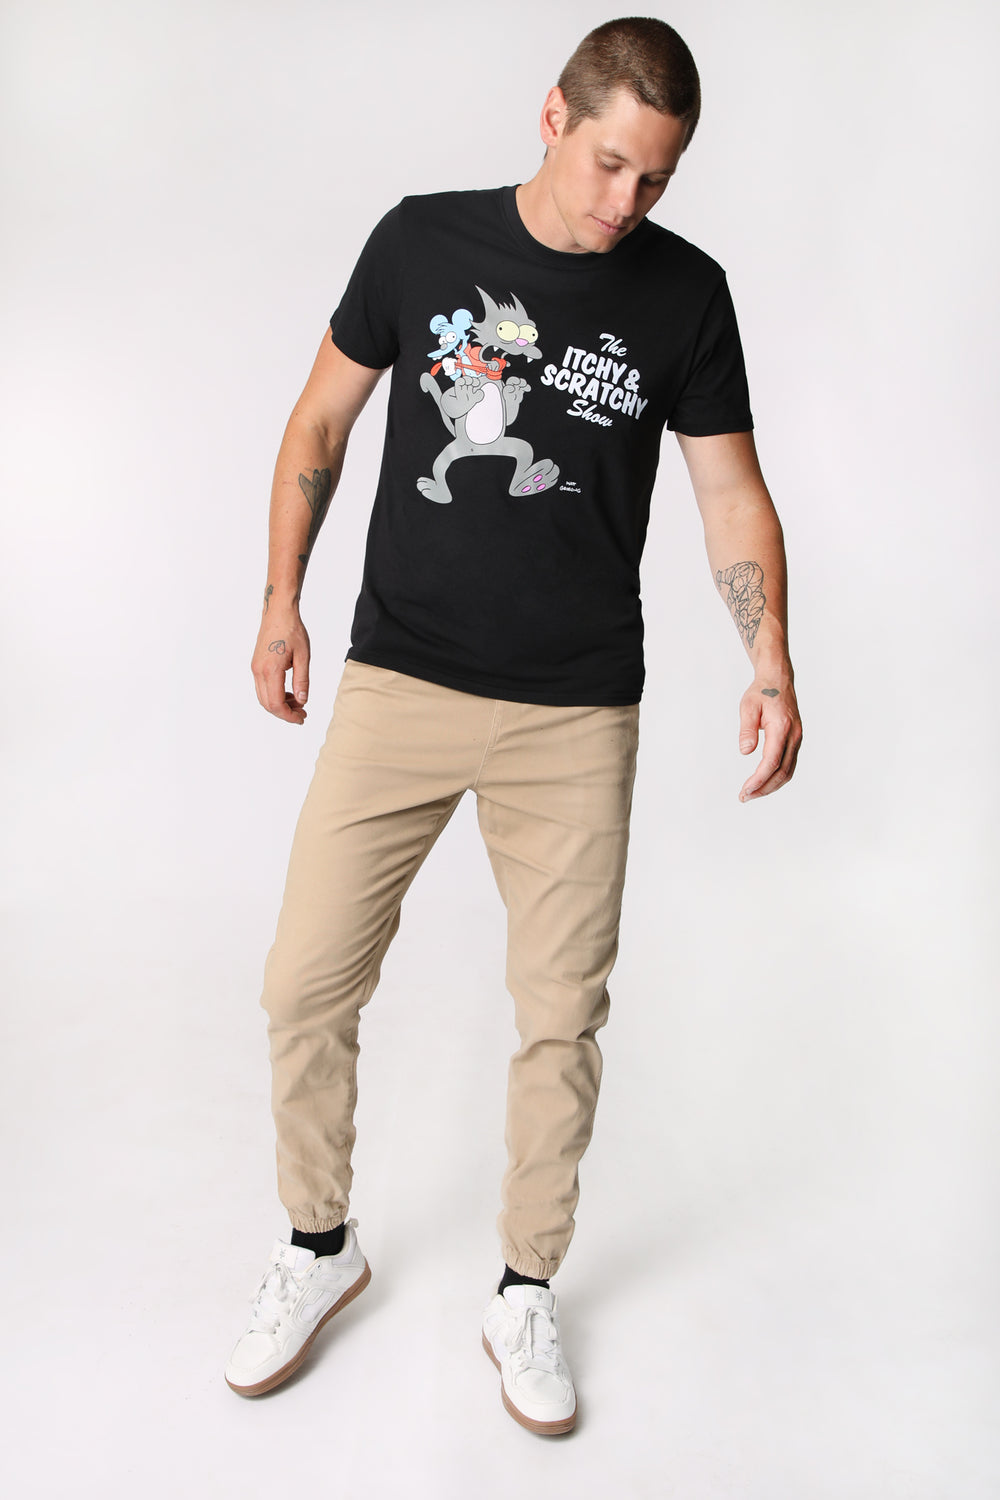 Mens The Itchy & Scratchy Show T-Shirt Mens The Itchy & Scratchy Show T-Shirt